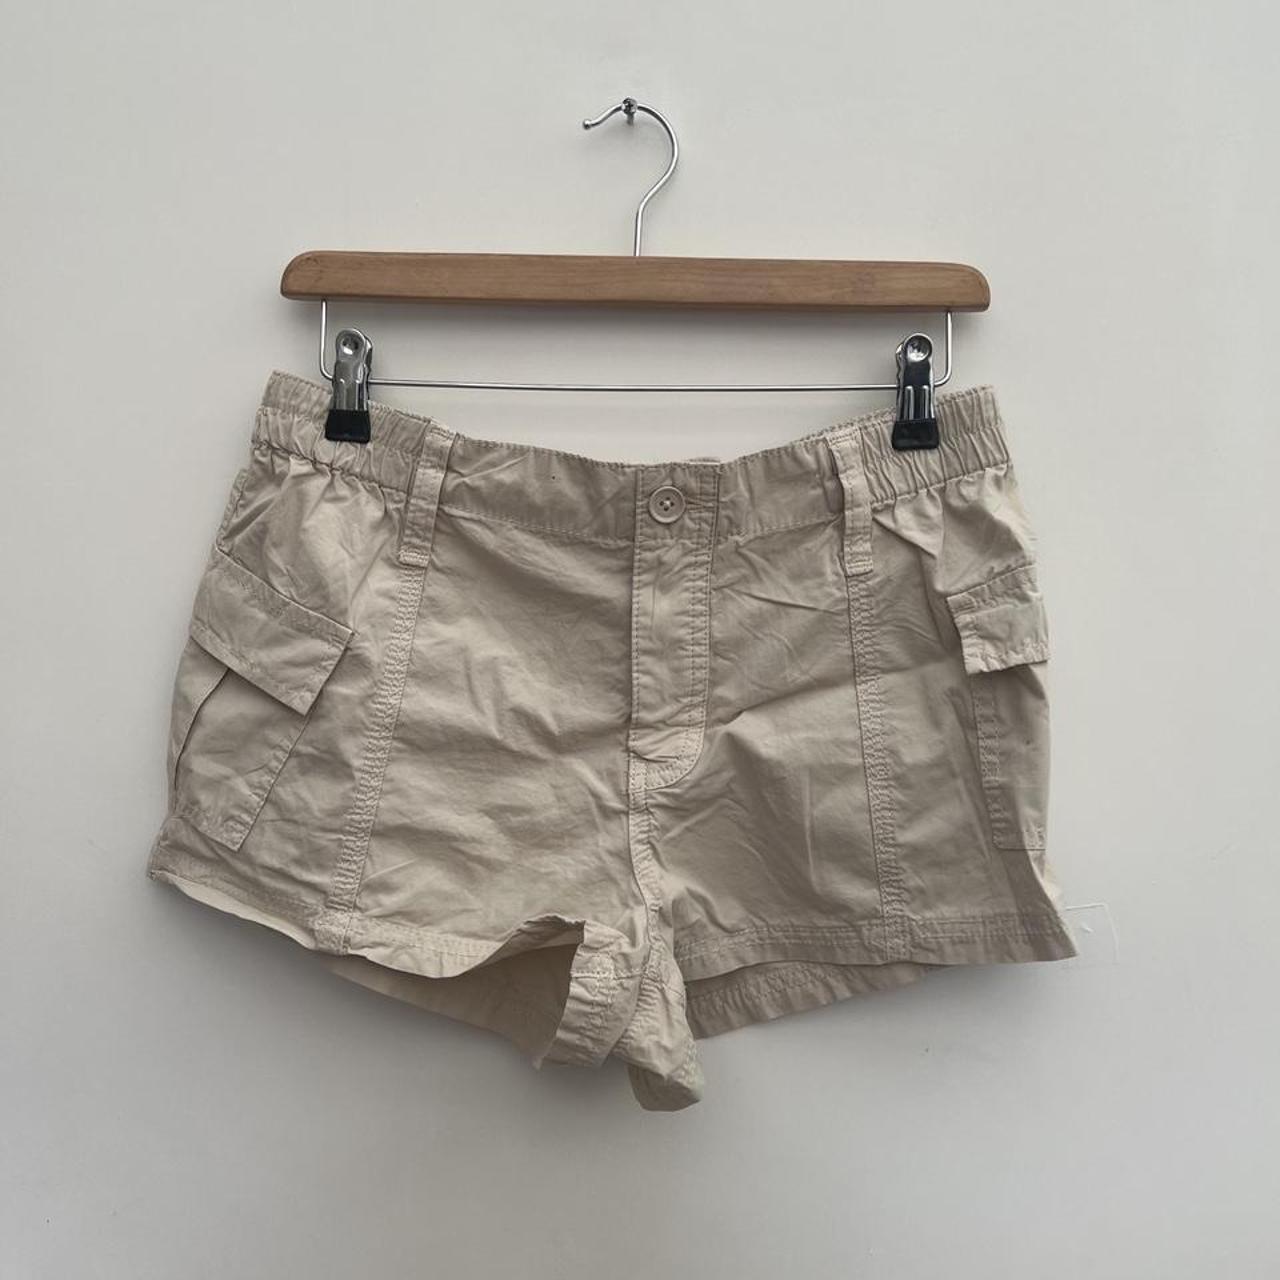 Urban outfitters BDG y2k cargo shorts in... - Depop